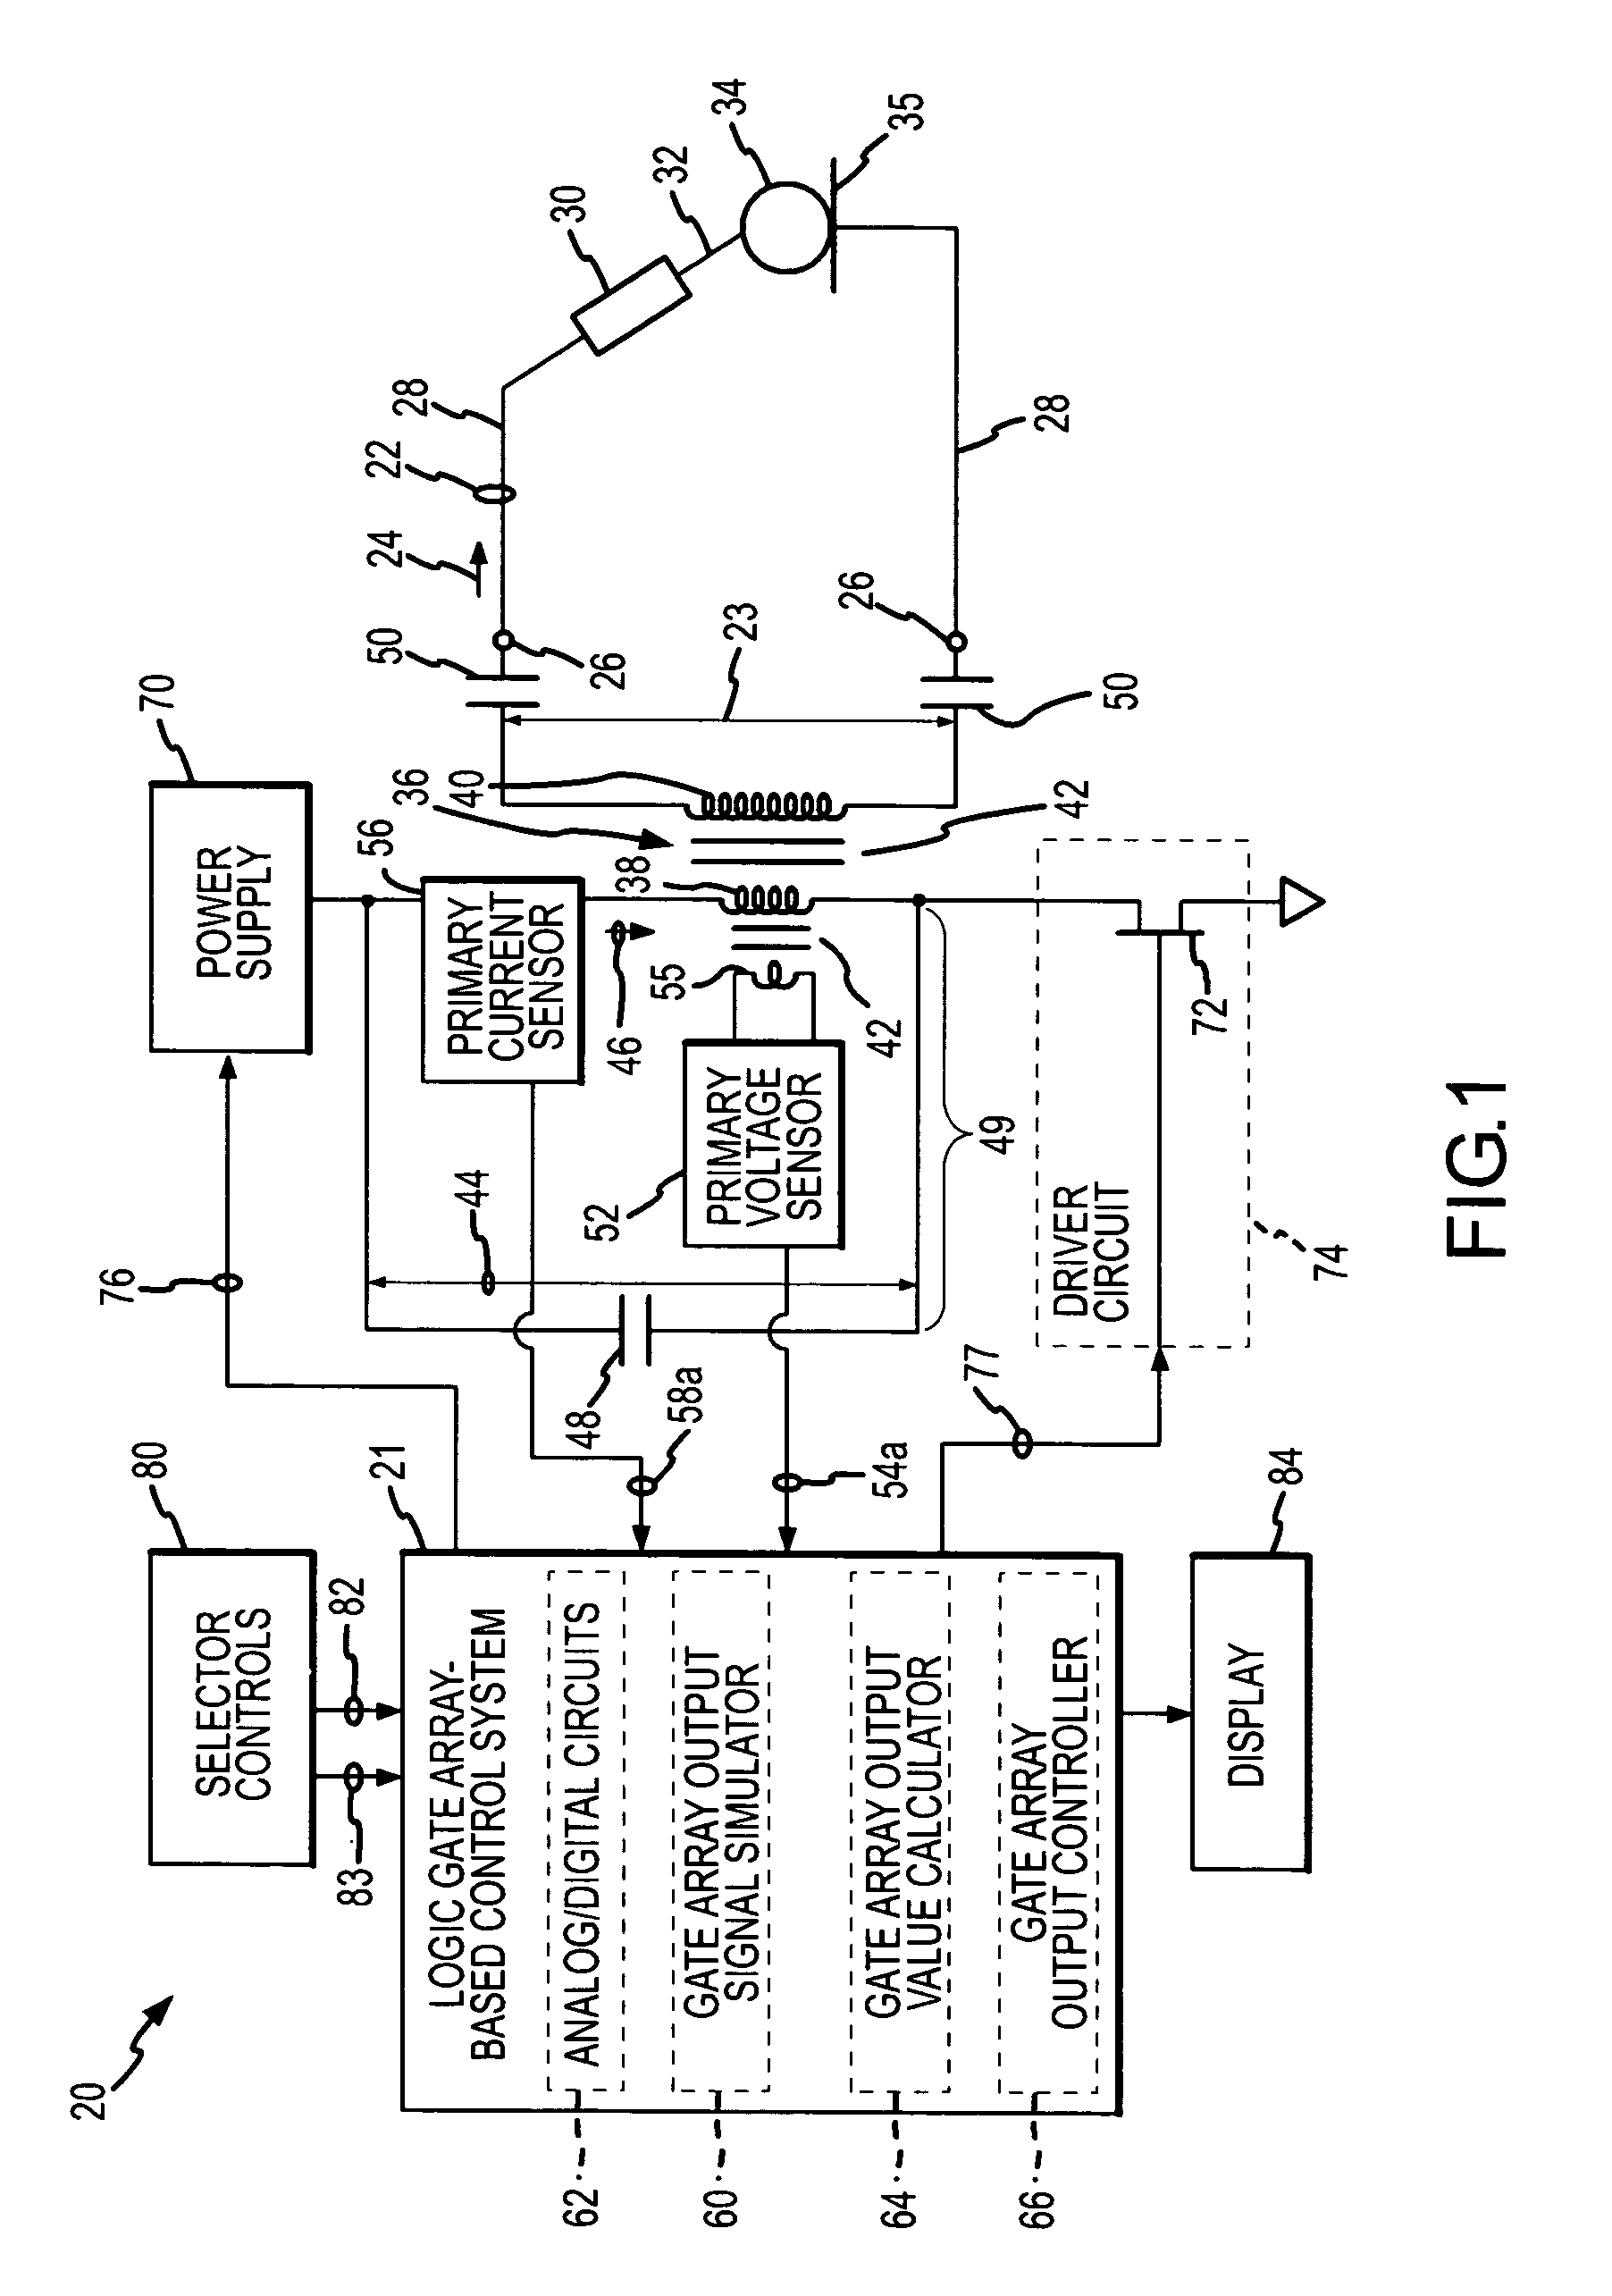 Near-instantaneous responsive closed loop control electrosurgical generator and method